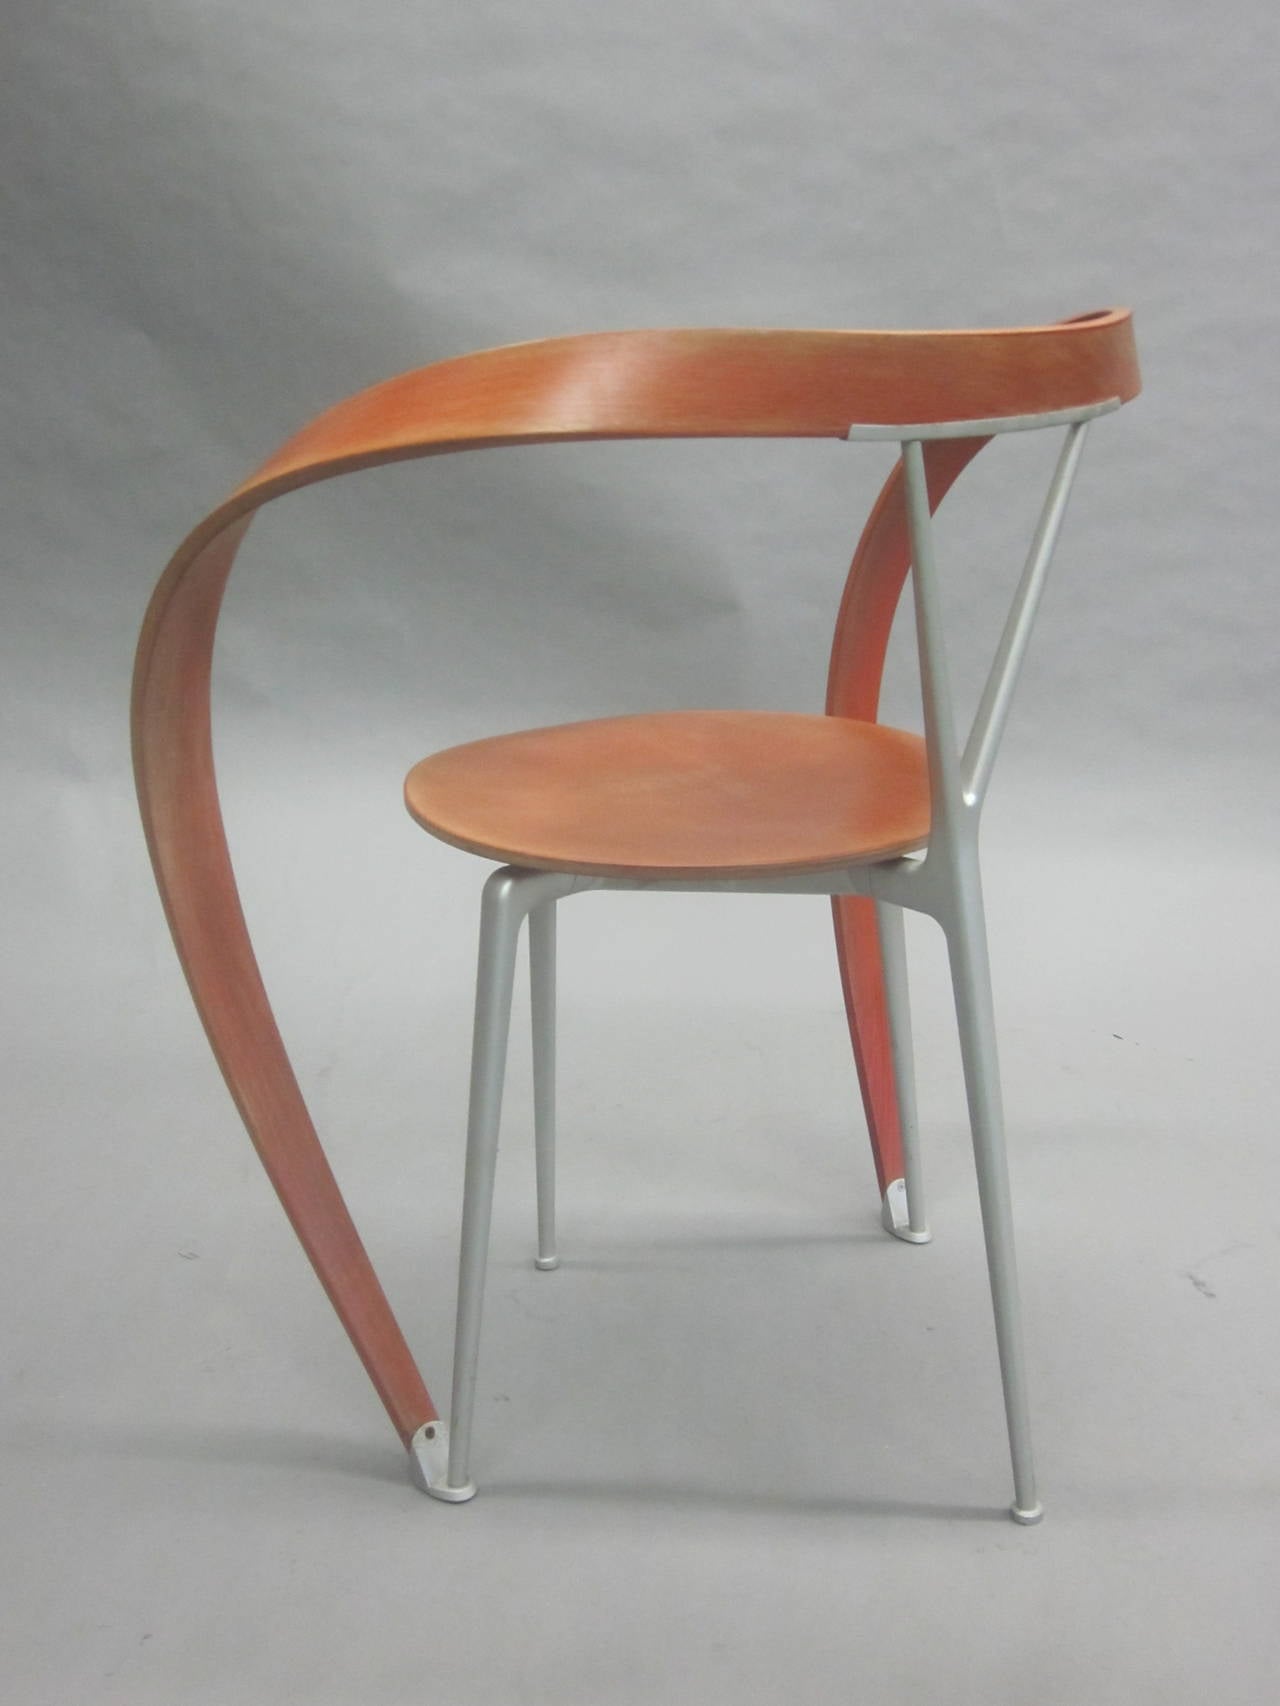 Italian Design / Mid-Century Style Modern Lounge Chair by Andrea Branzi, 1993 For Sale 1